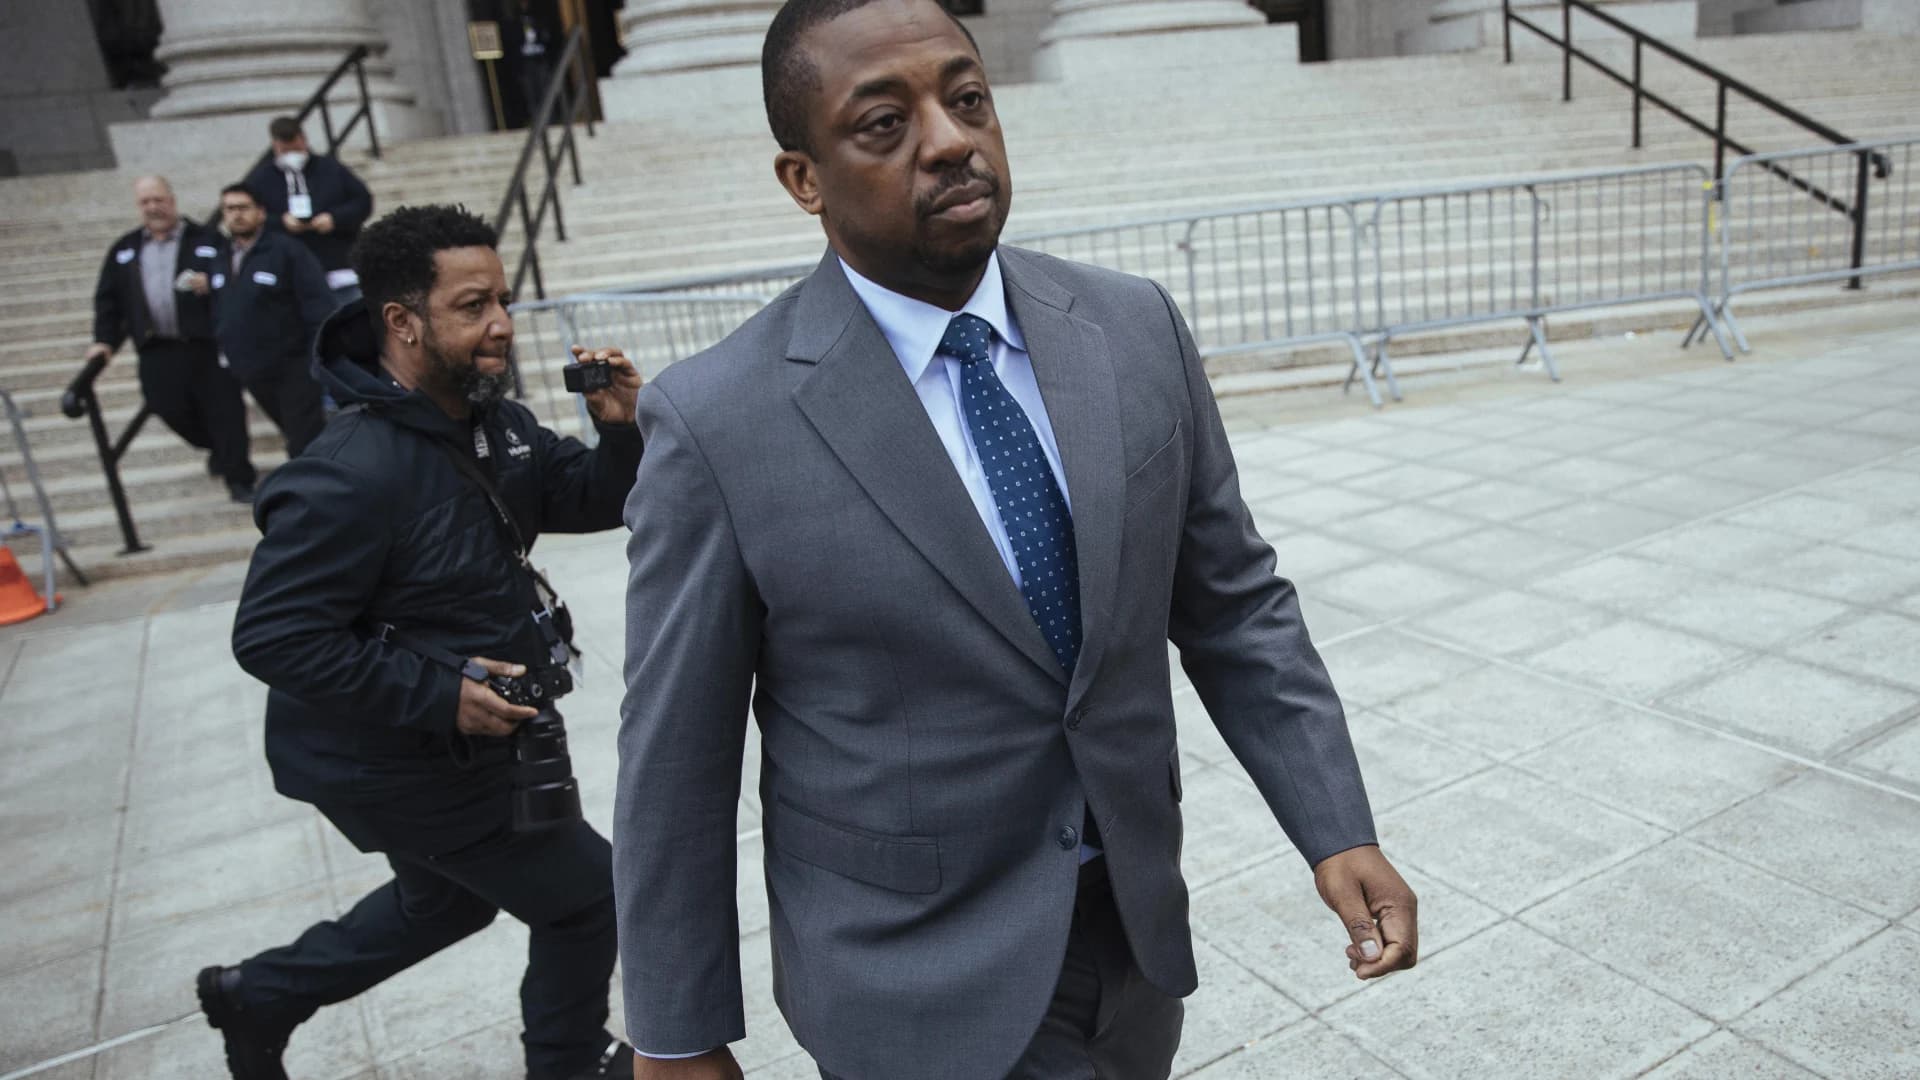 Bribery, fraud charges reinstated against former New York Lt. Governor